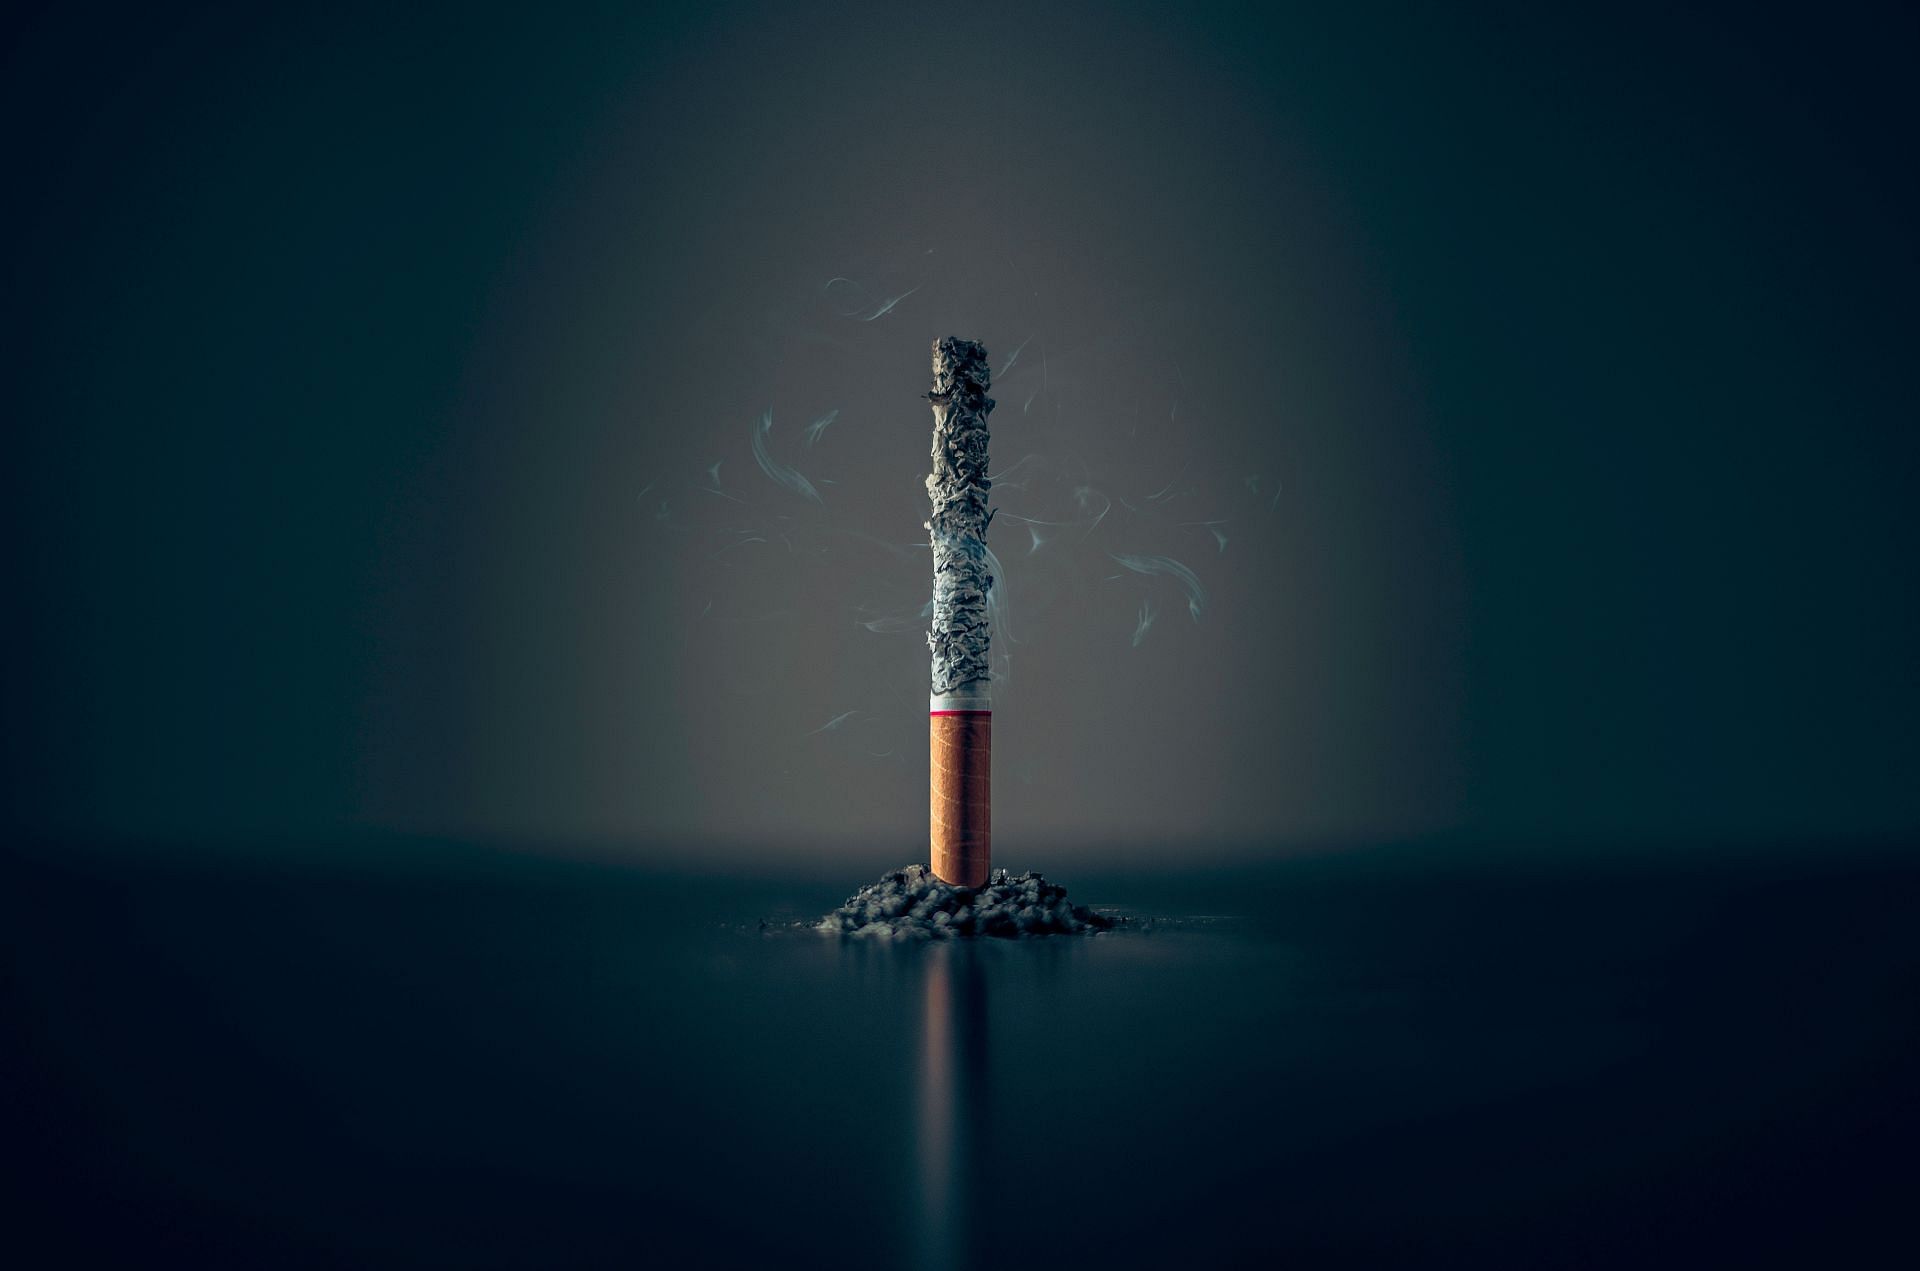 Quitting smoking can cure wheezing (Image by Mathew MacQuarrie/Unsplash)